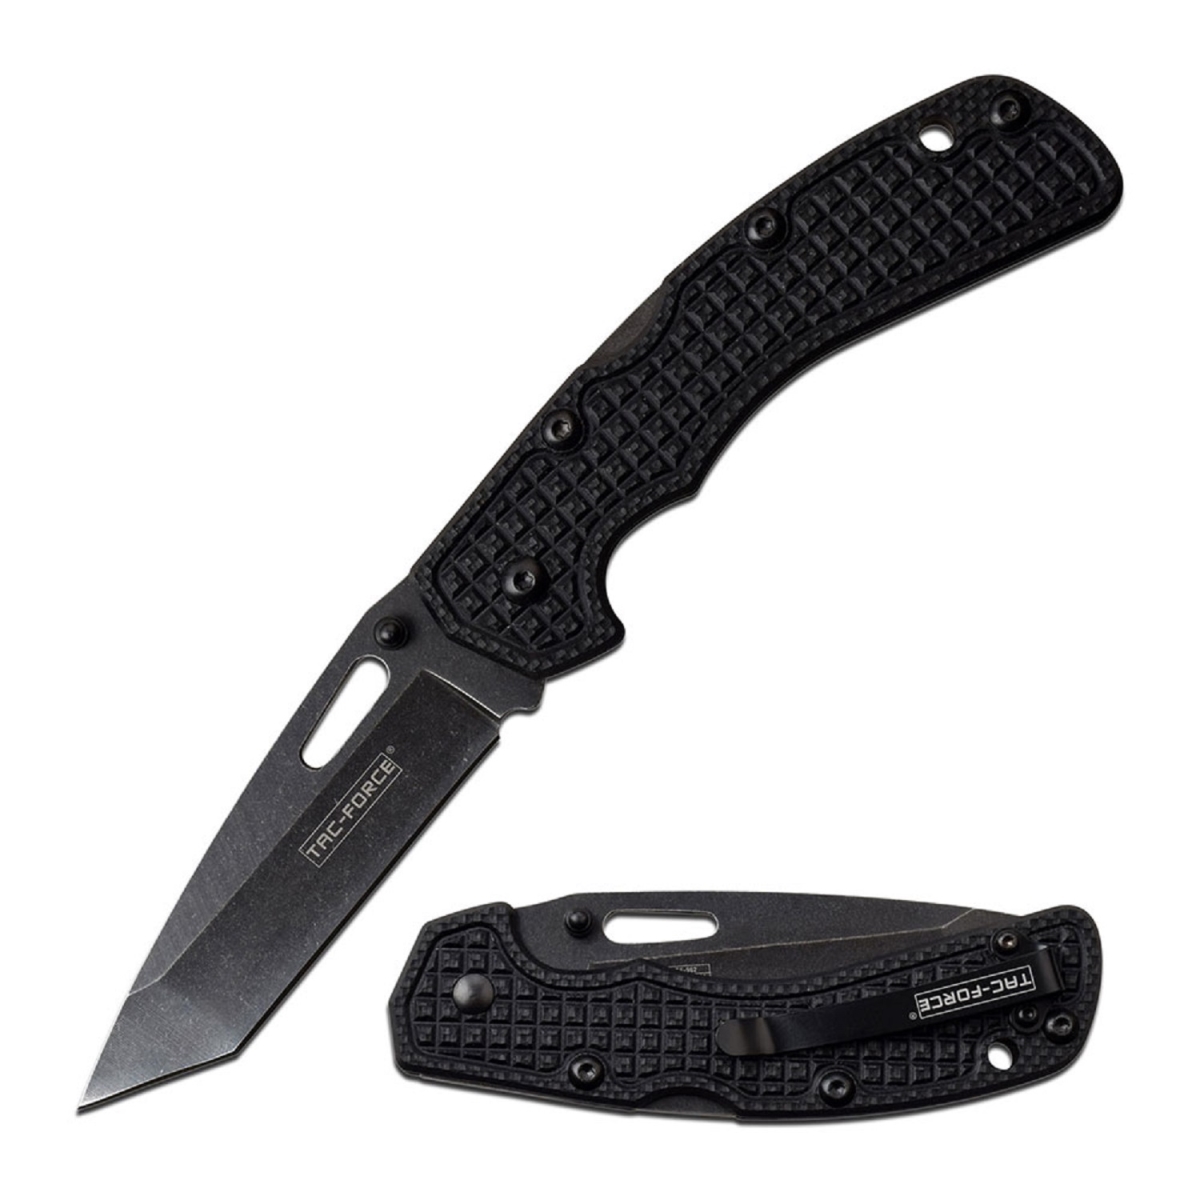 4016221 Manual Folder Knife 3.25 In. With 7.75 In. Blade Size, Black